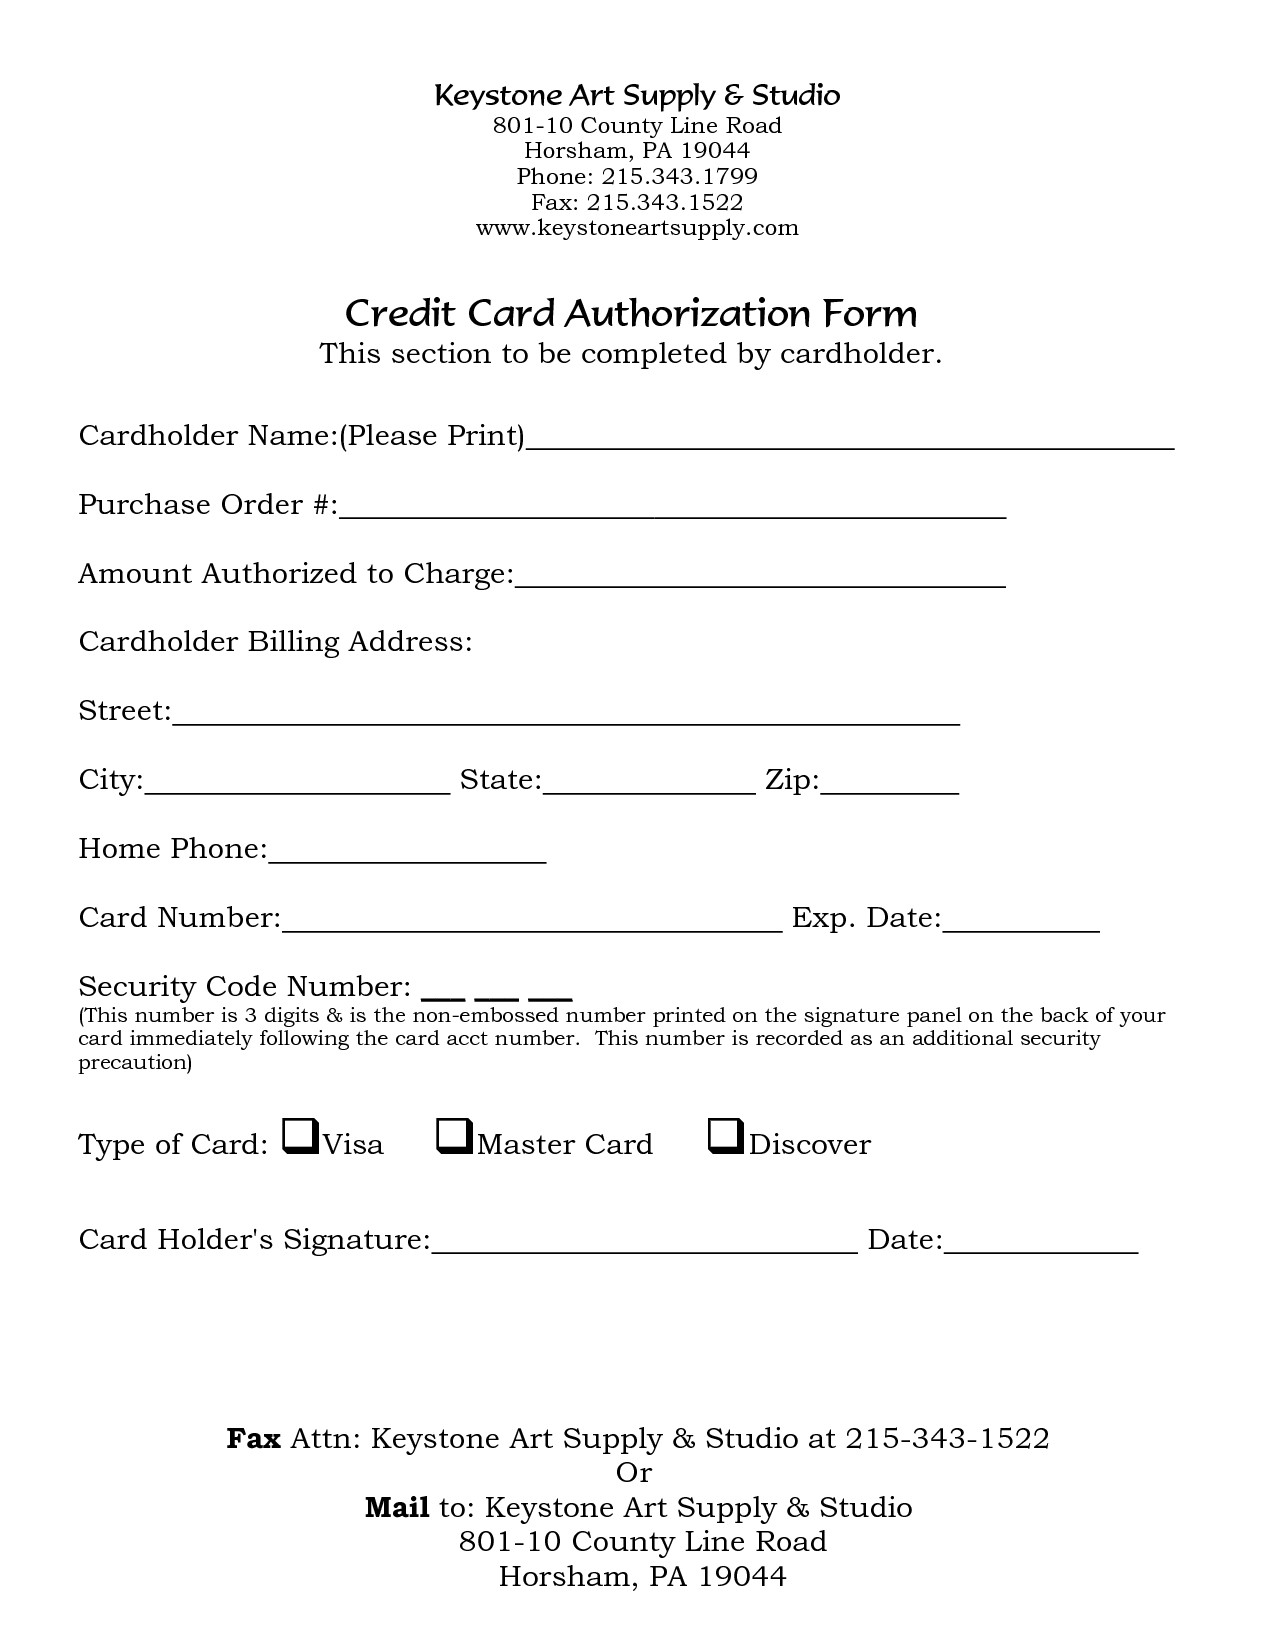 Credit Card form Template 5 Credit Card form Templates formats Examples In Word Excel